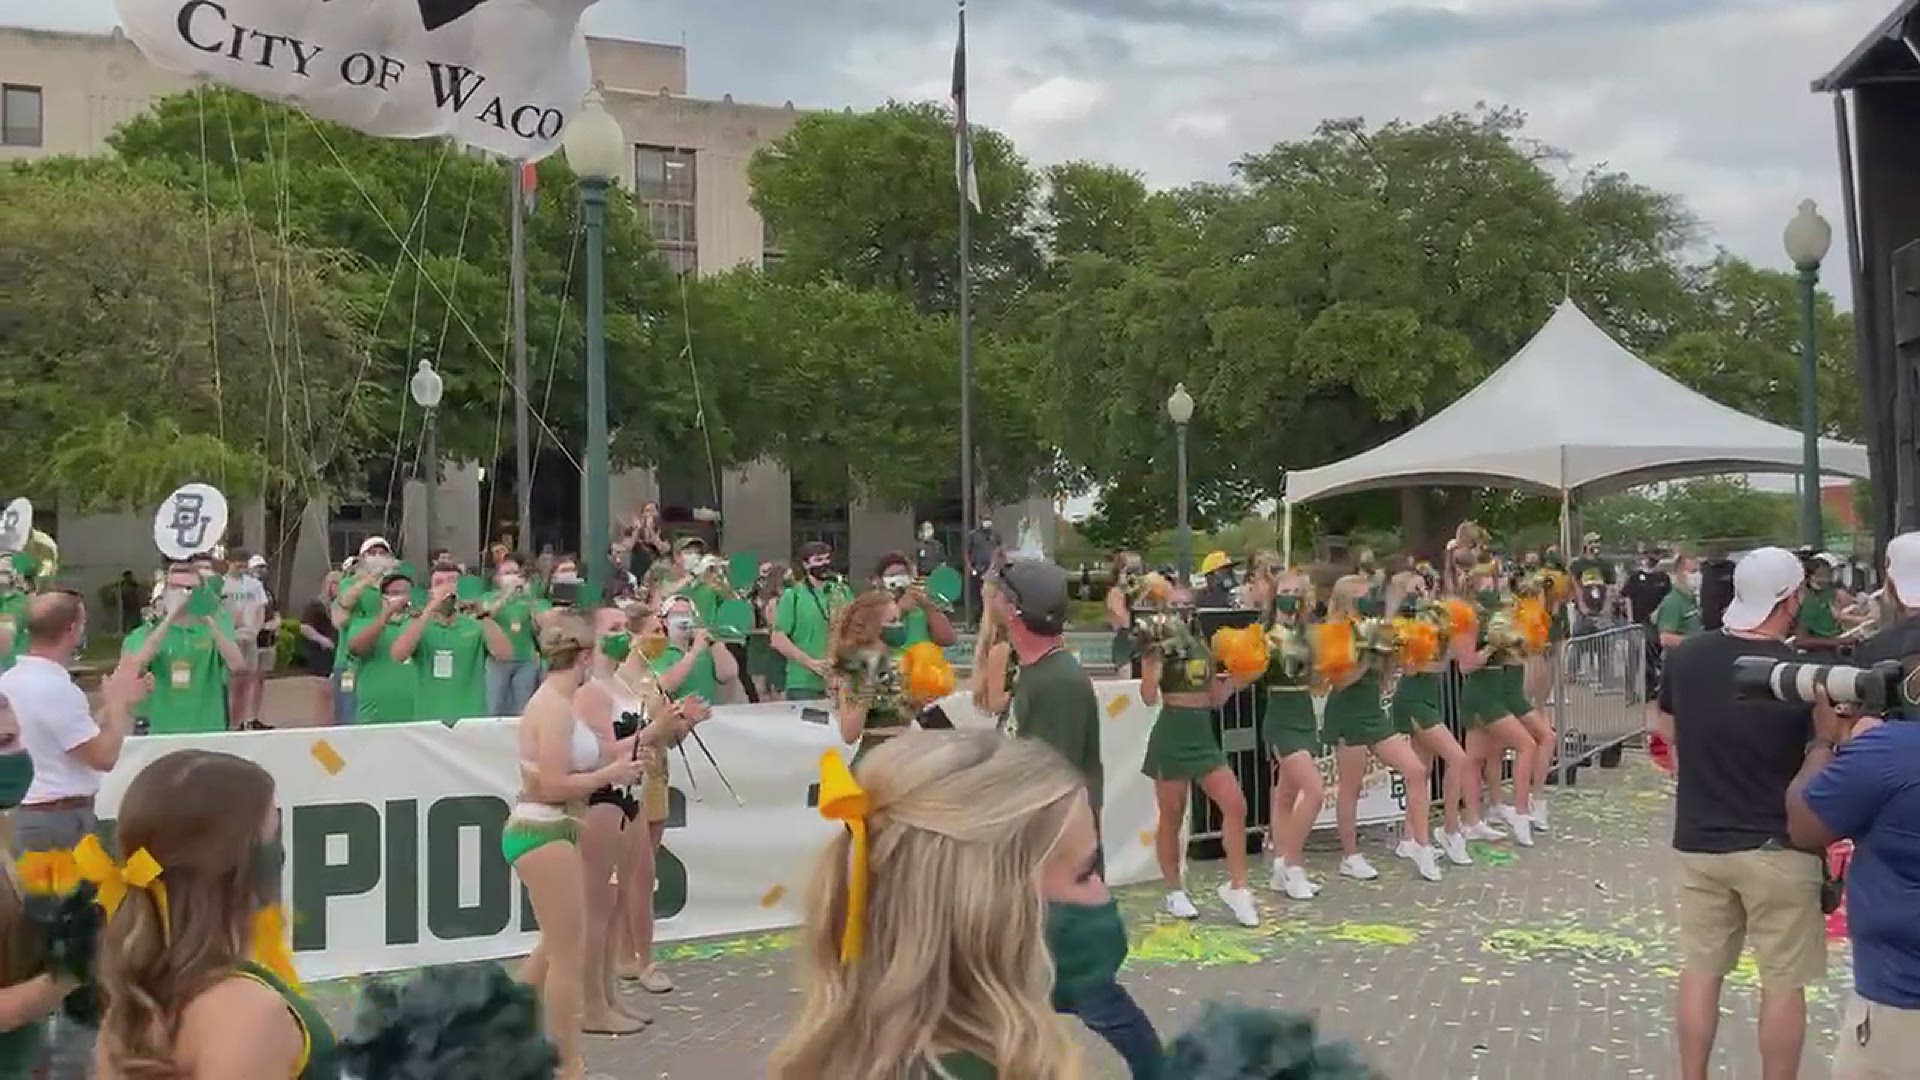 The Baylor cheerleaders got the crowd in spirit ahead of the Baylor Bears parade that happened in Downtown Waco Tuesday, April 13.
Credit: Lyndie Miller